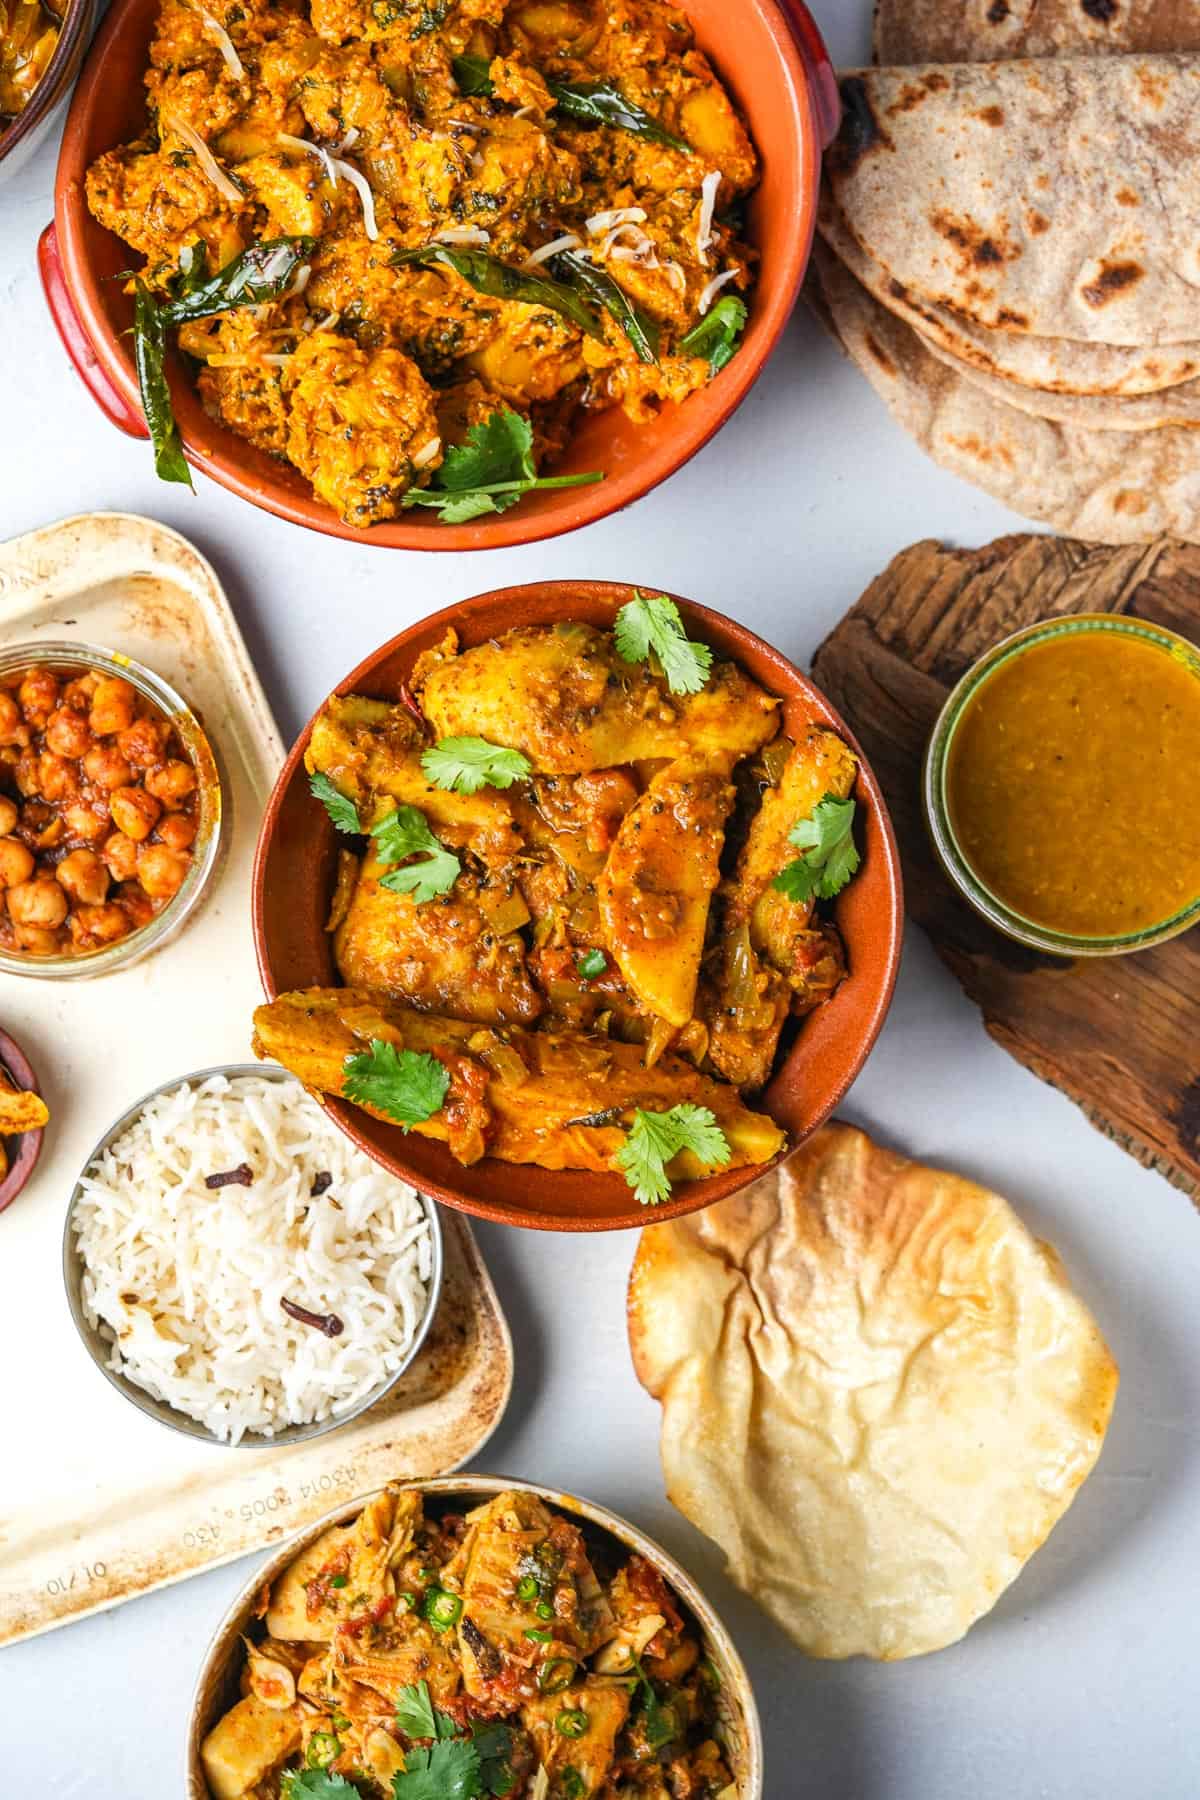 A variety of Indian food in bowls on a table including arbi ki sabji in a red bowl.